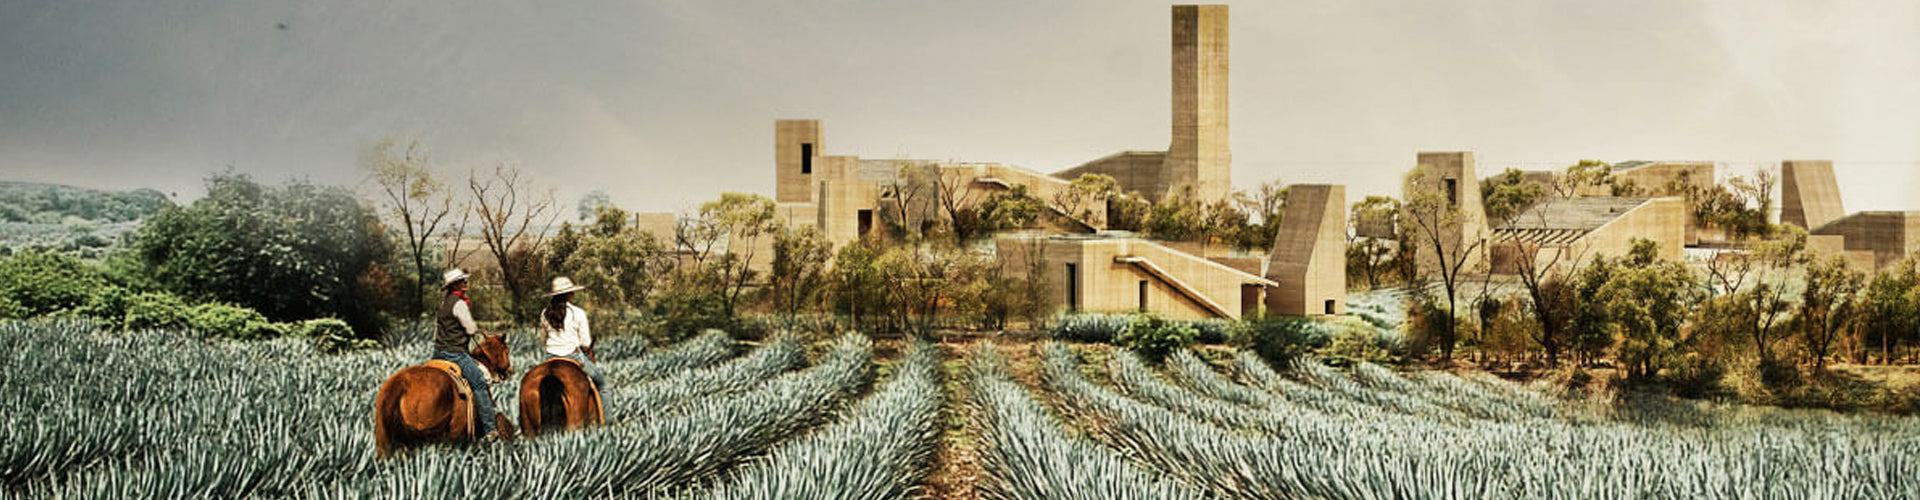 Field of Organic Agave for Clase Azul Tequila